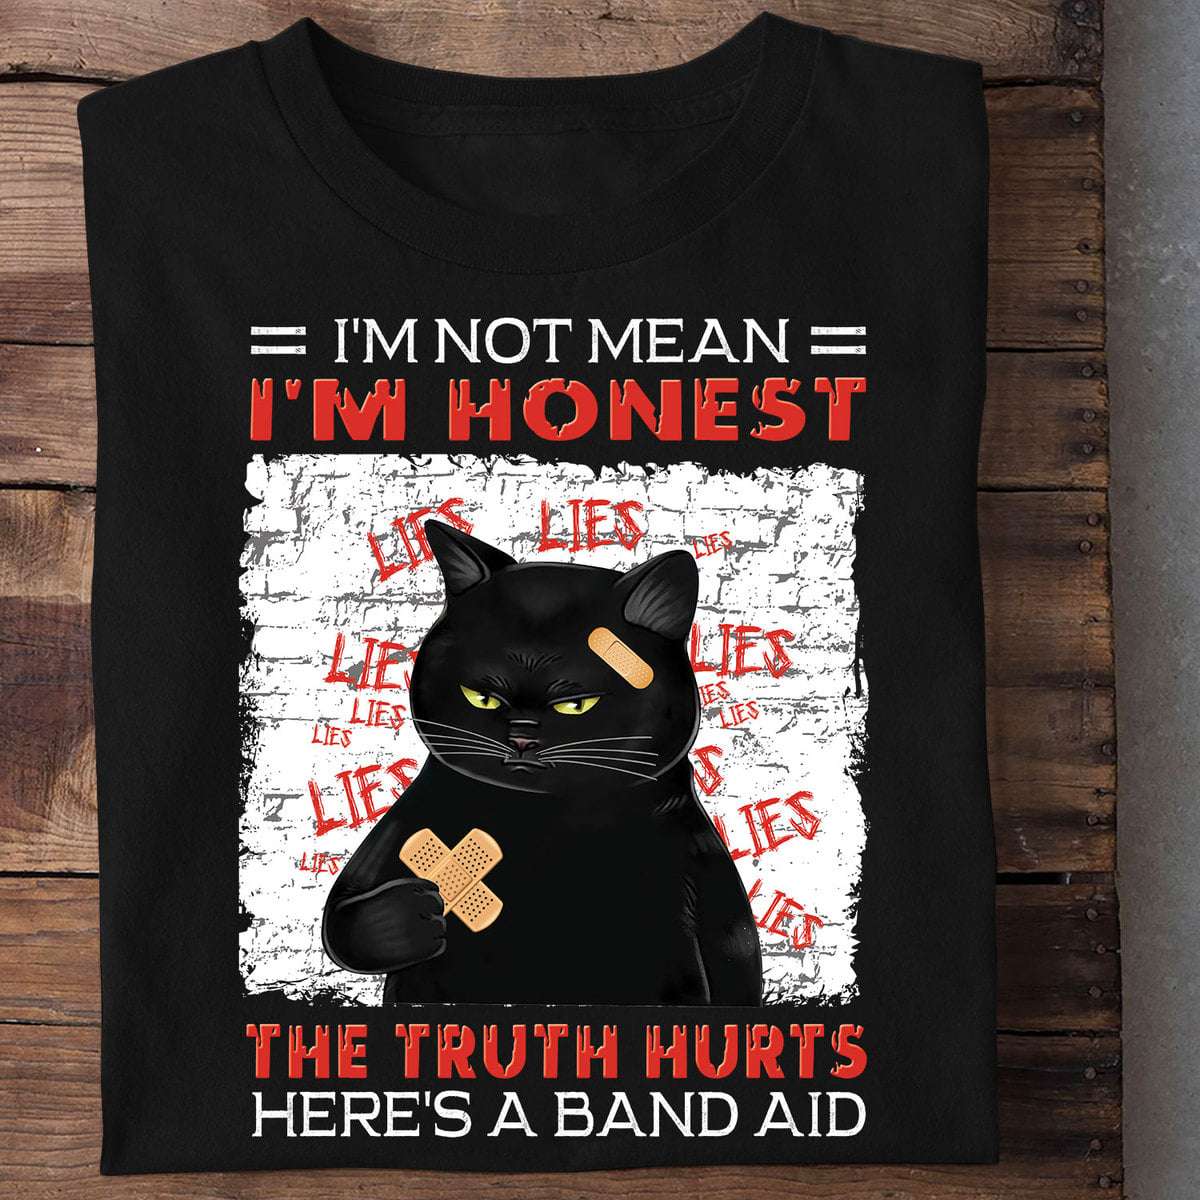 Black Cat And Band Aid - I'm not mean i'm honest the truth hurts here's a band aid